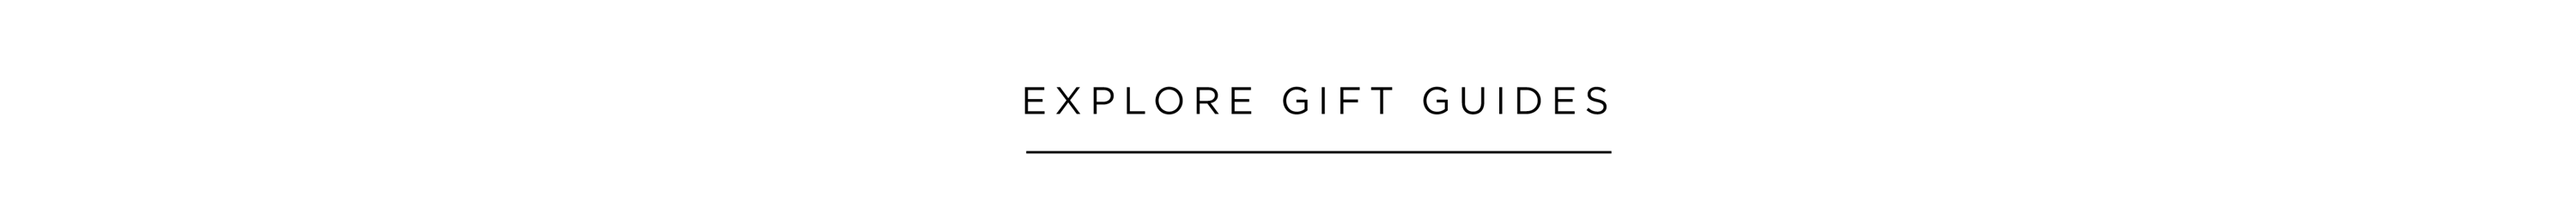 Explore Gift Guides